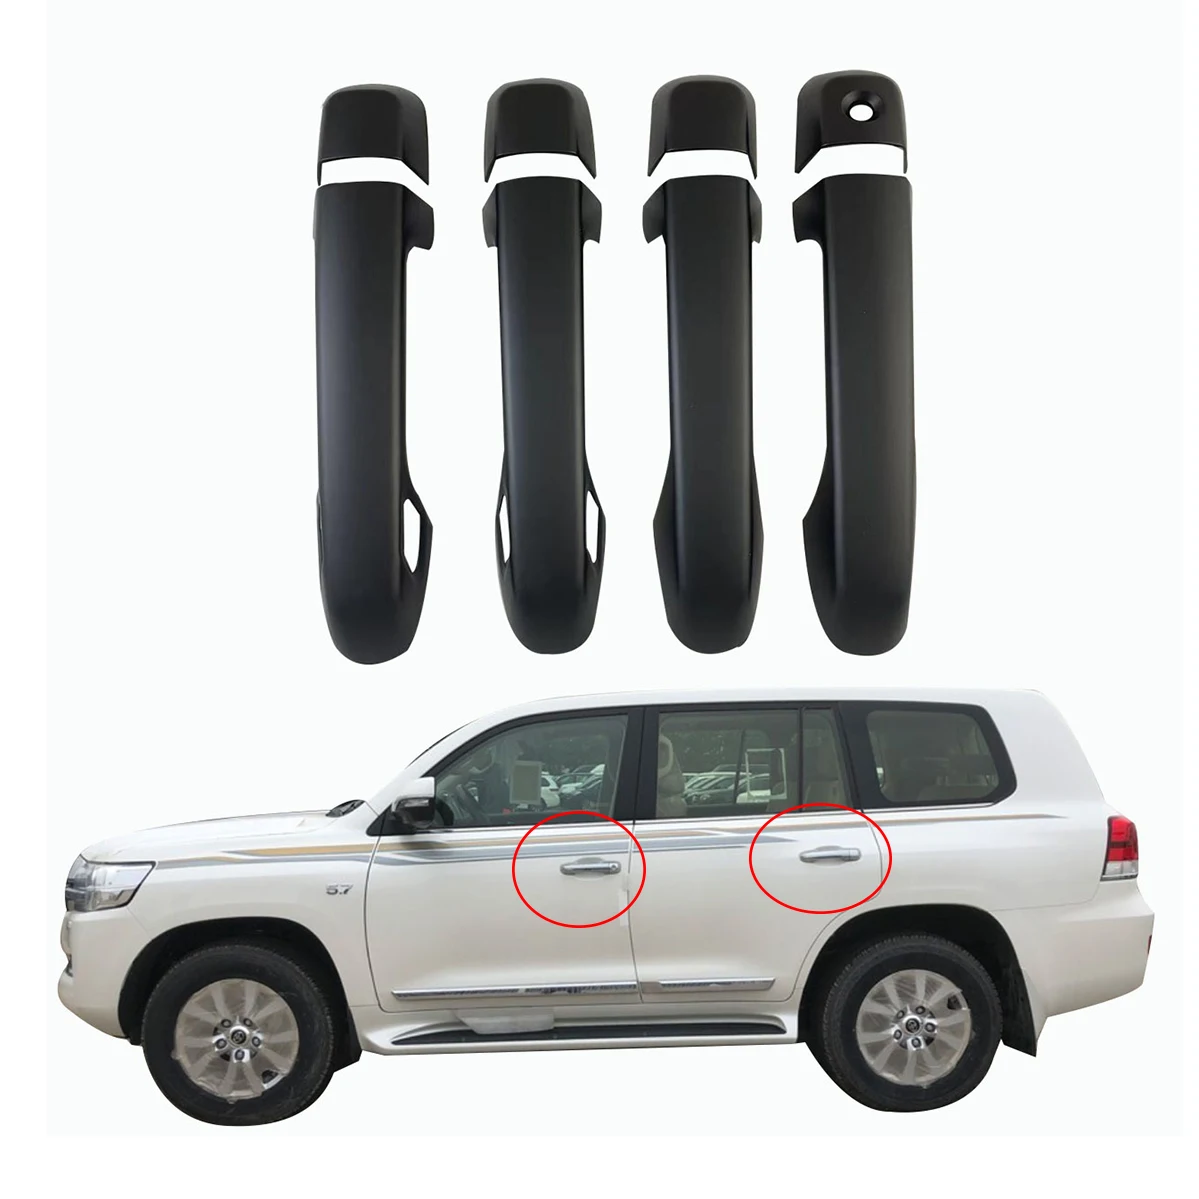 

Car Matte black Door Handle Cover Protector For Toyota Land Cruiser FJ200 LC200 2016 2017 2018 2019 2020 2021 2022 Paste Style